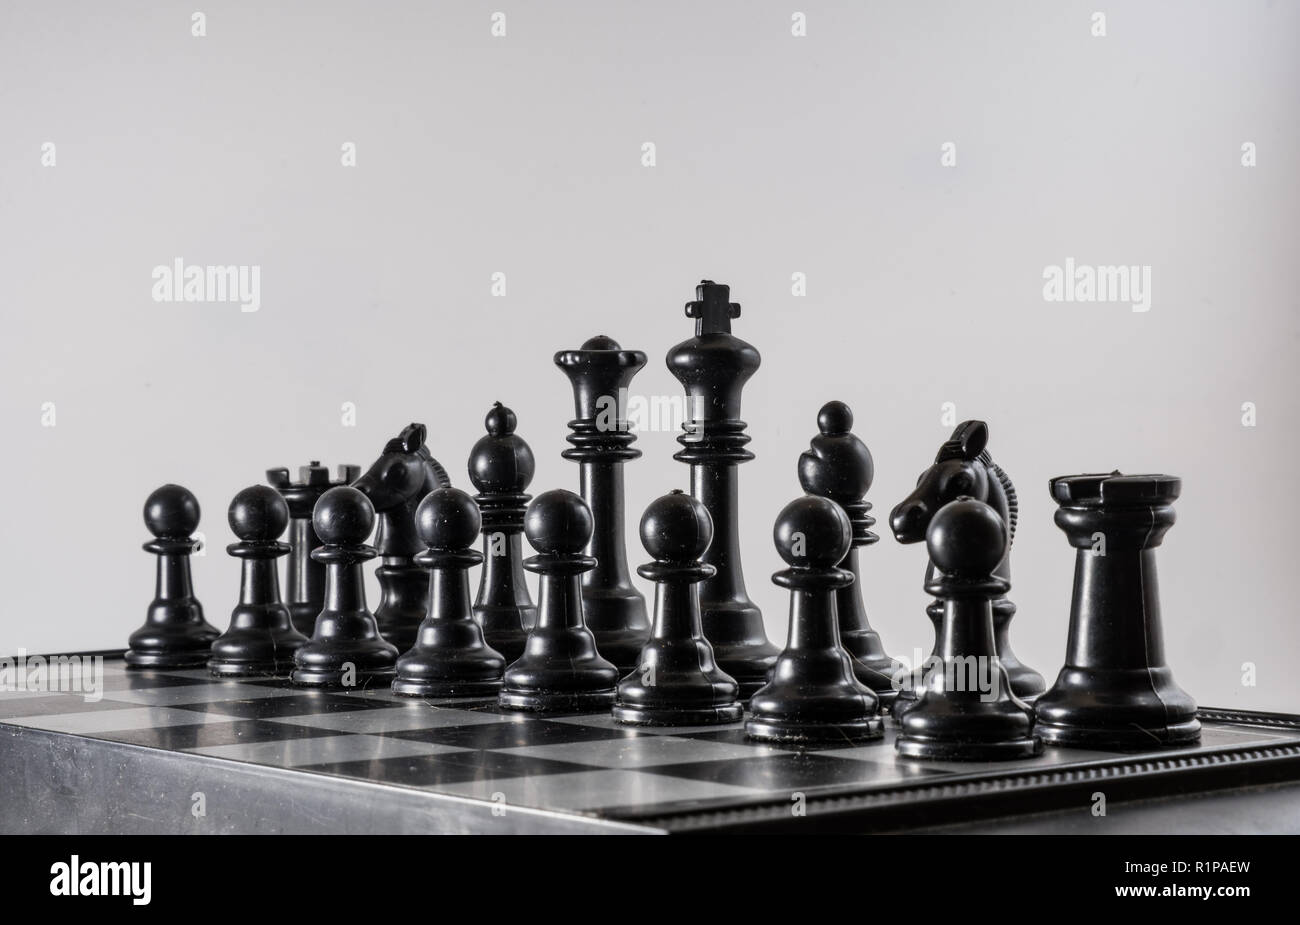 Black chess side view on a black background 2018 Stock Photo